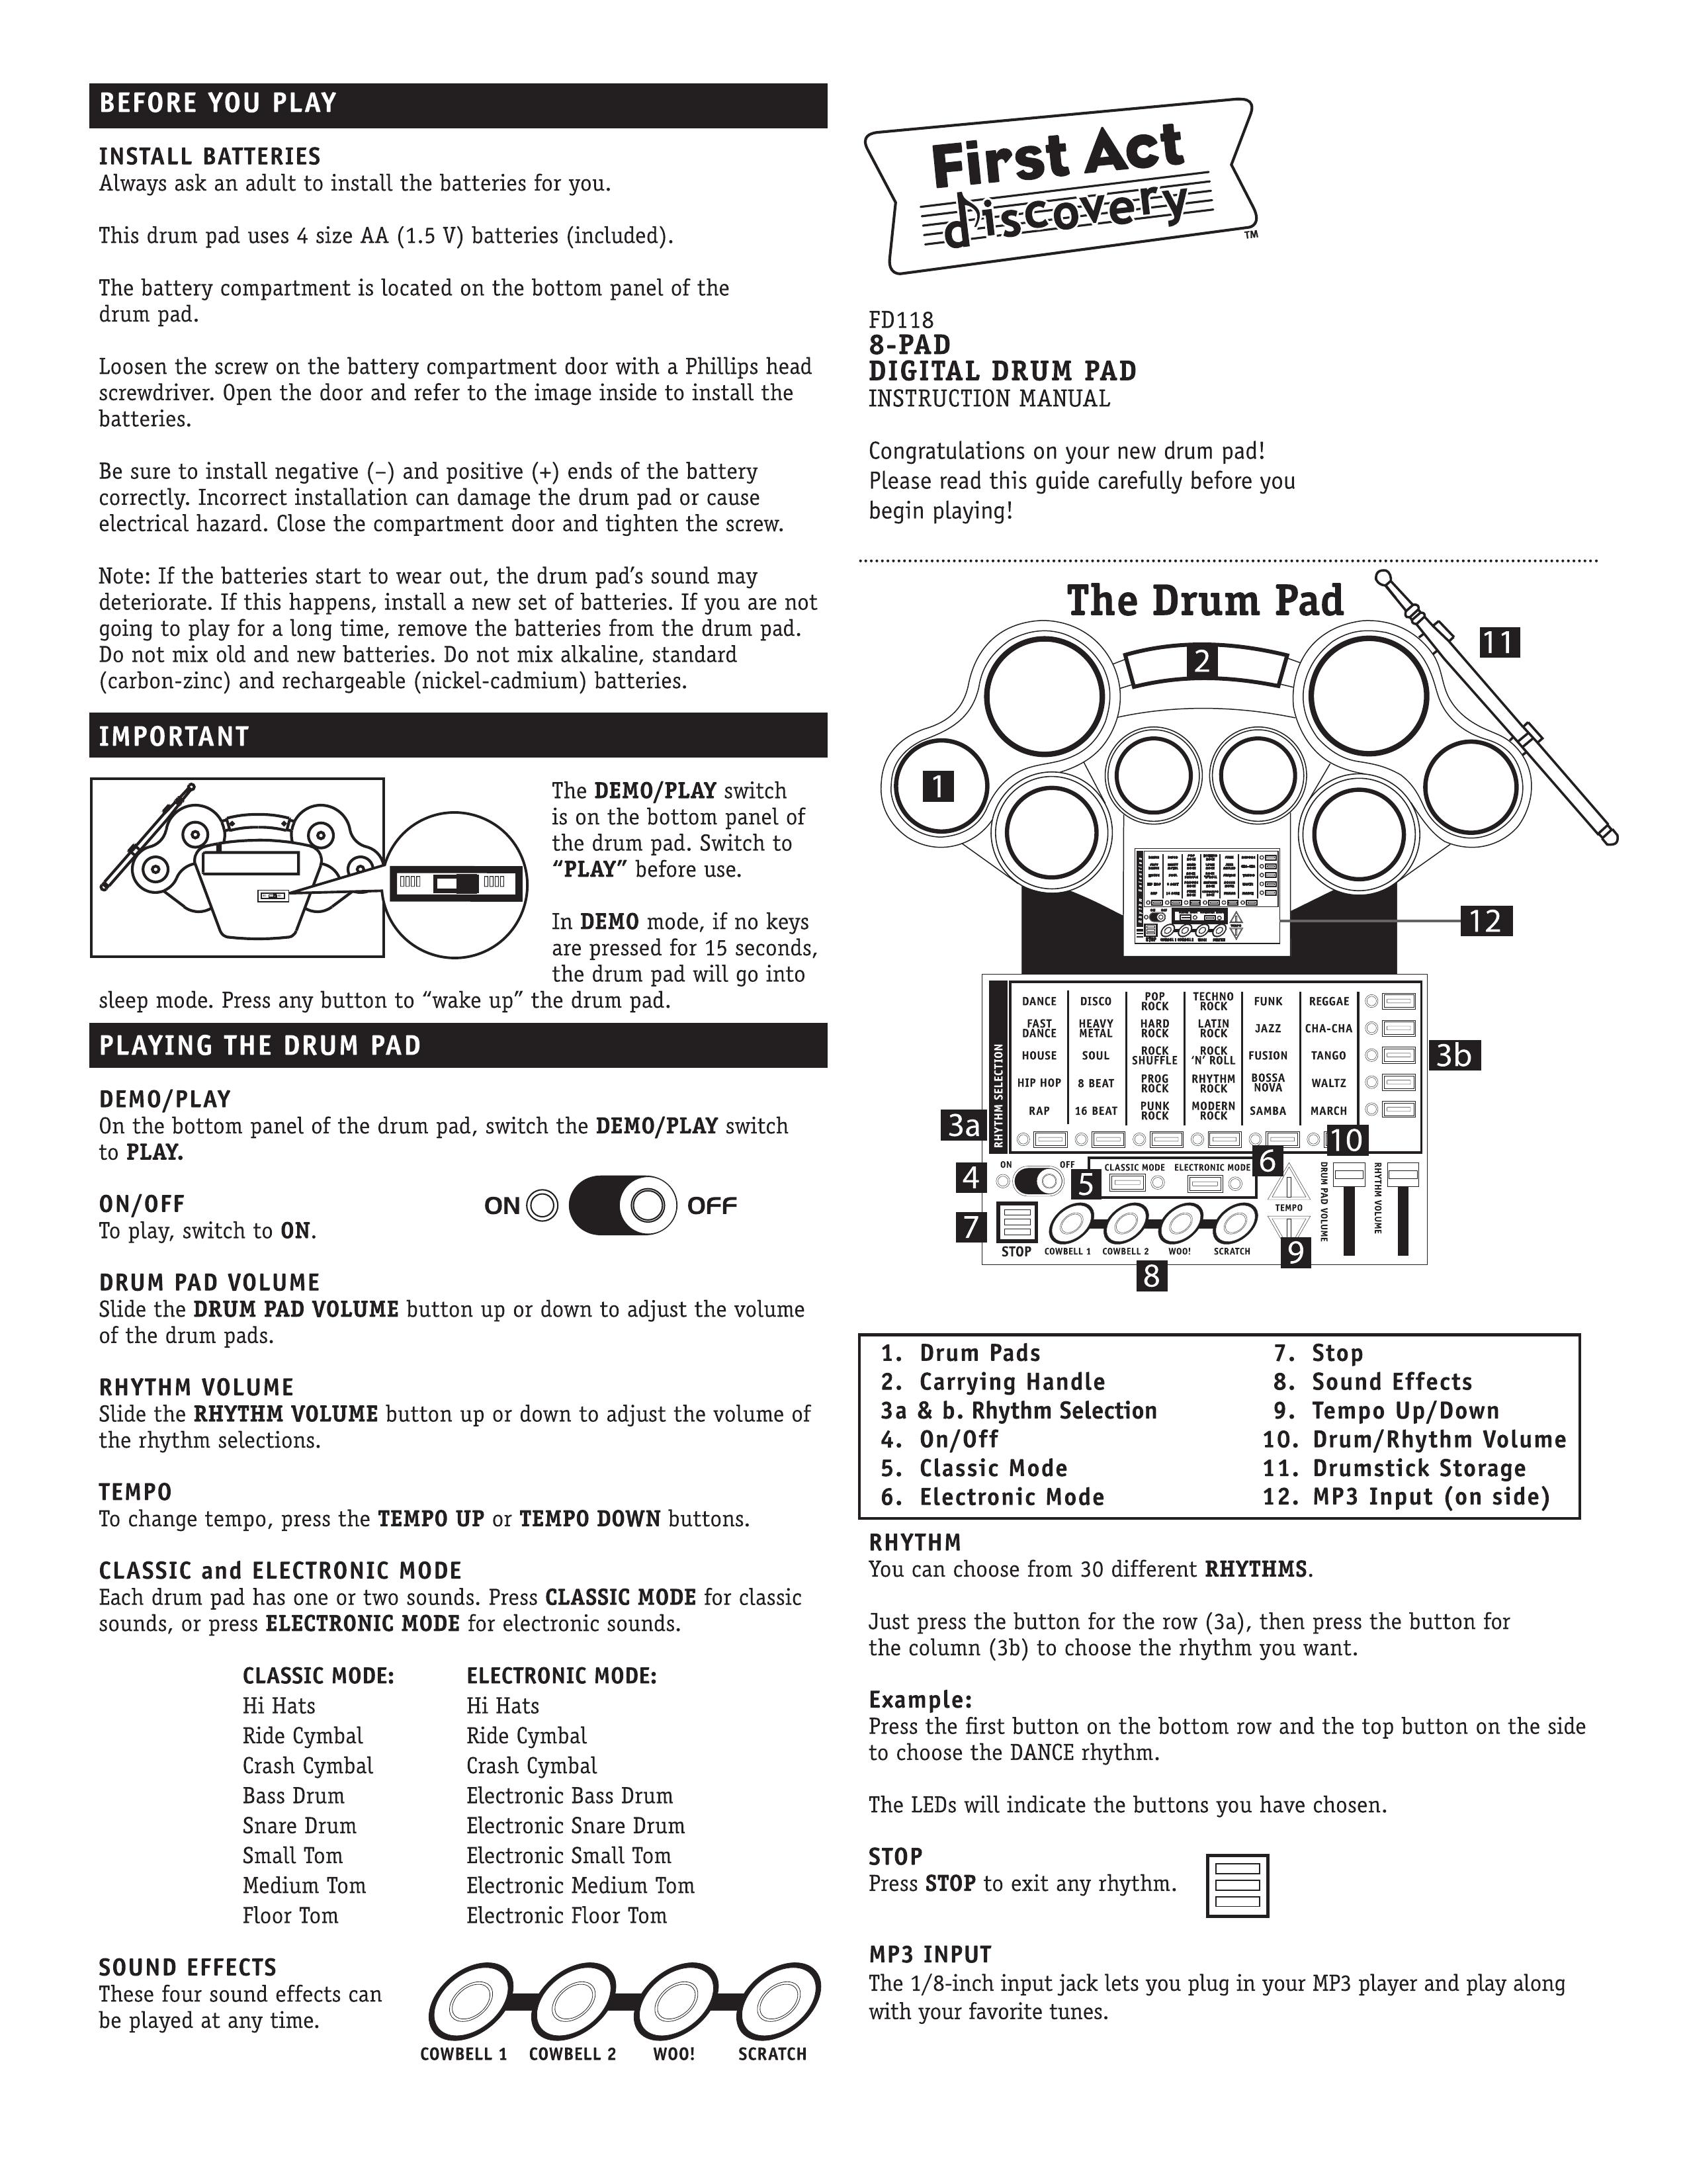 First Act FD118 Drums User Manual